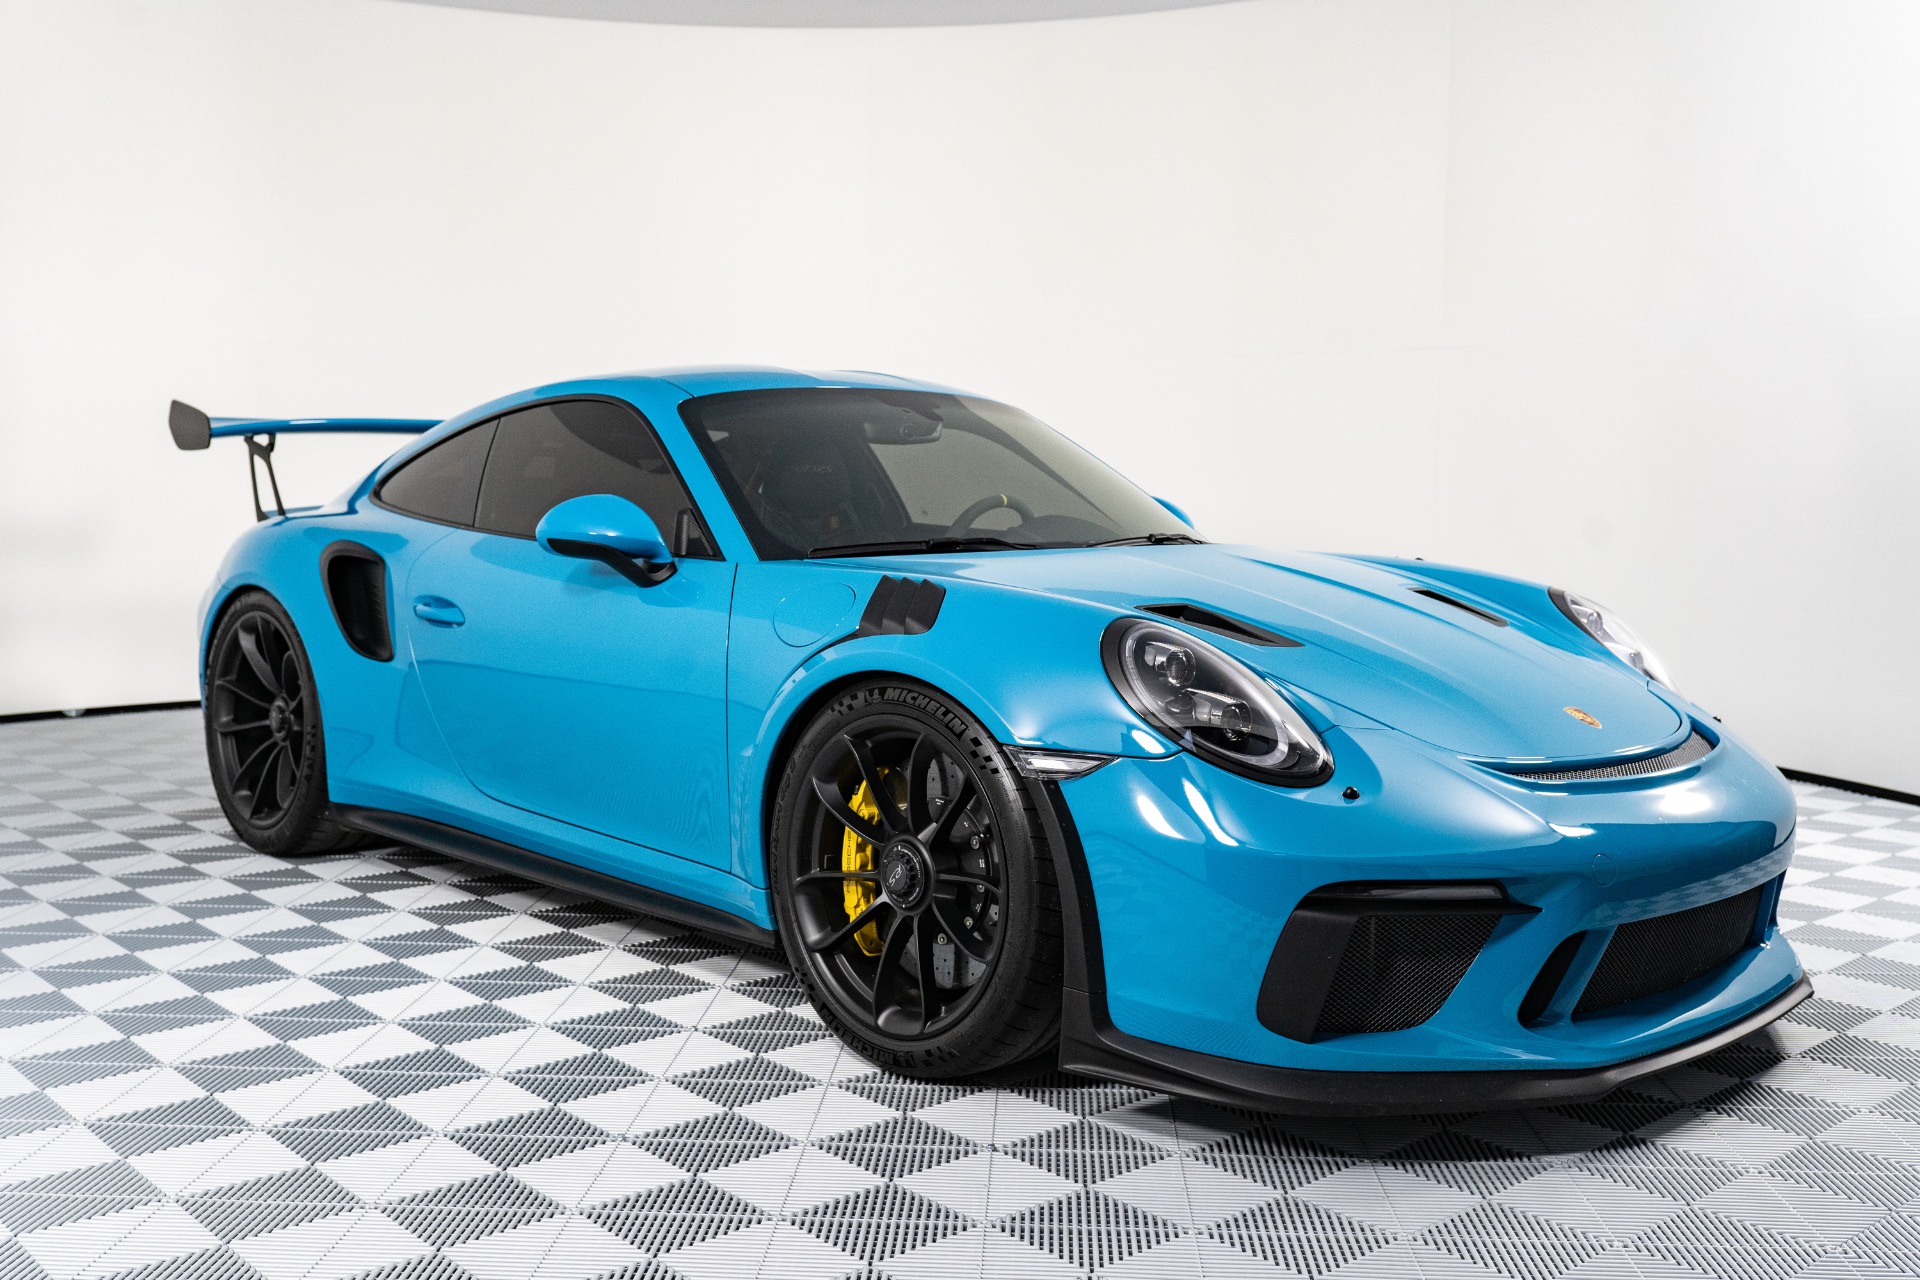 Used-2019-Porsche-911-GT3-RS-Coupe-Super-RARE-Miami-Blue-Front-Lift-LOW-Miles-LOADED